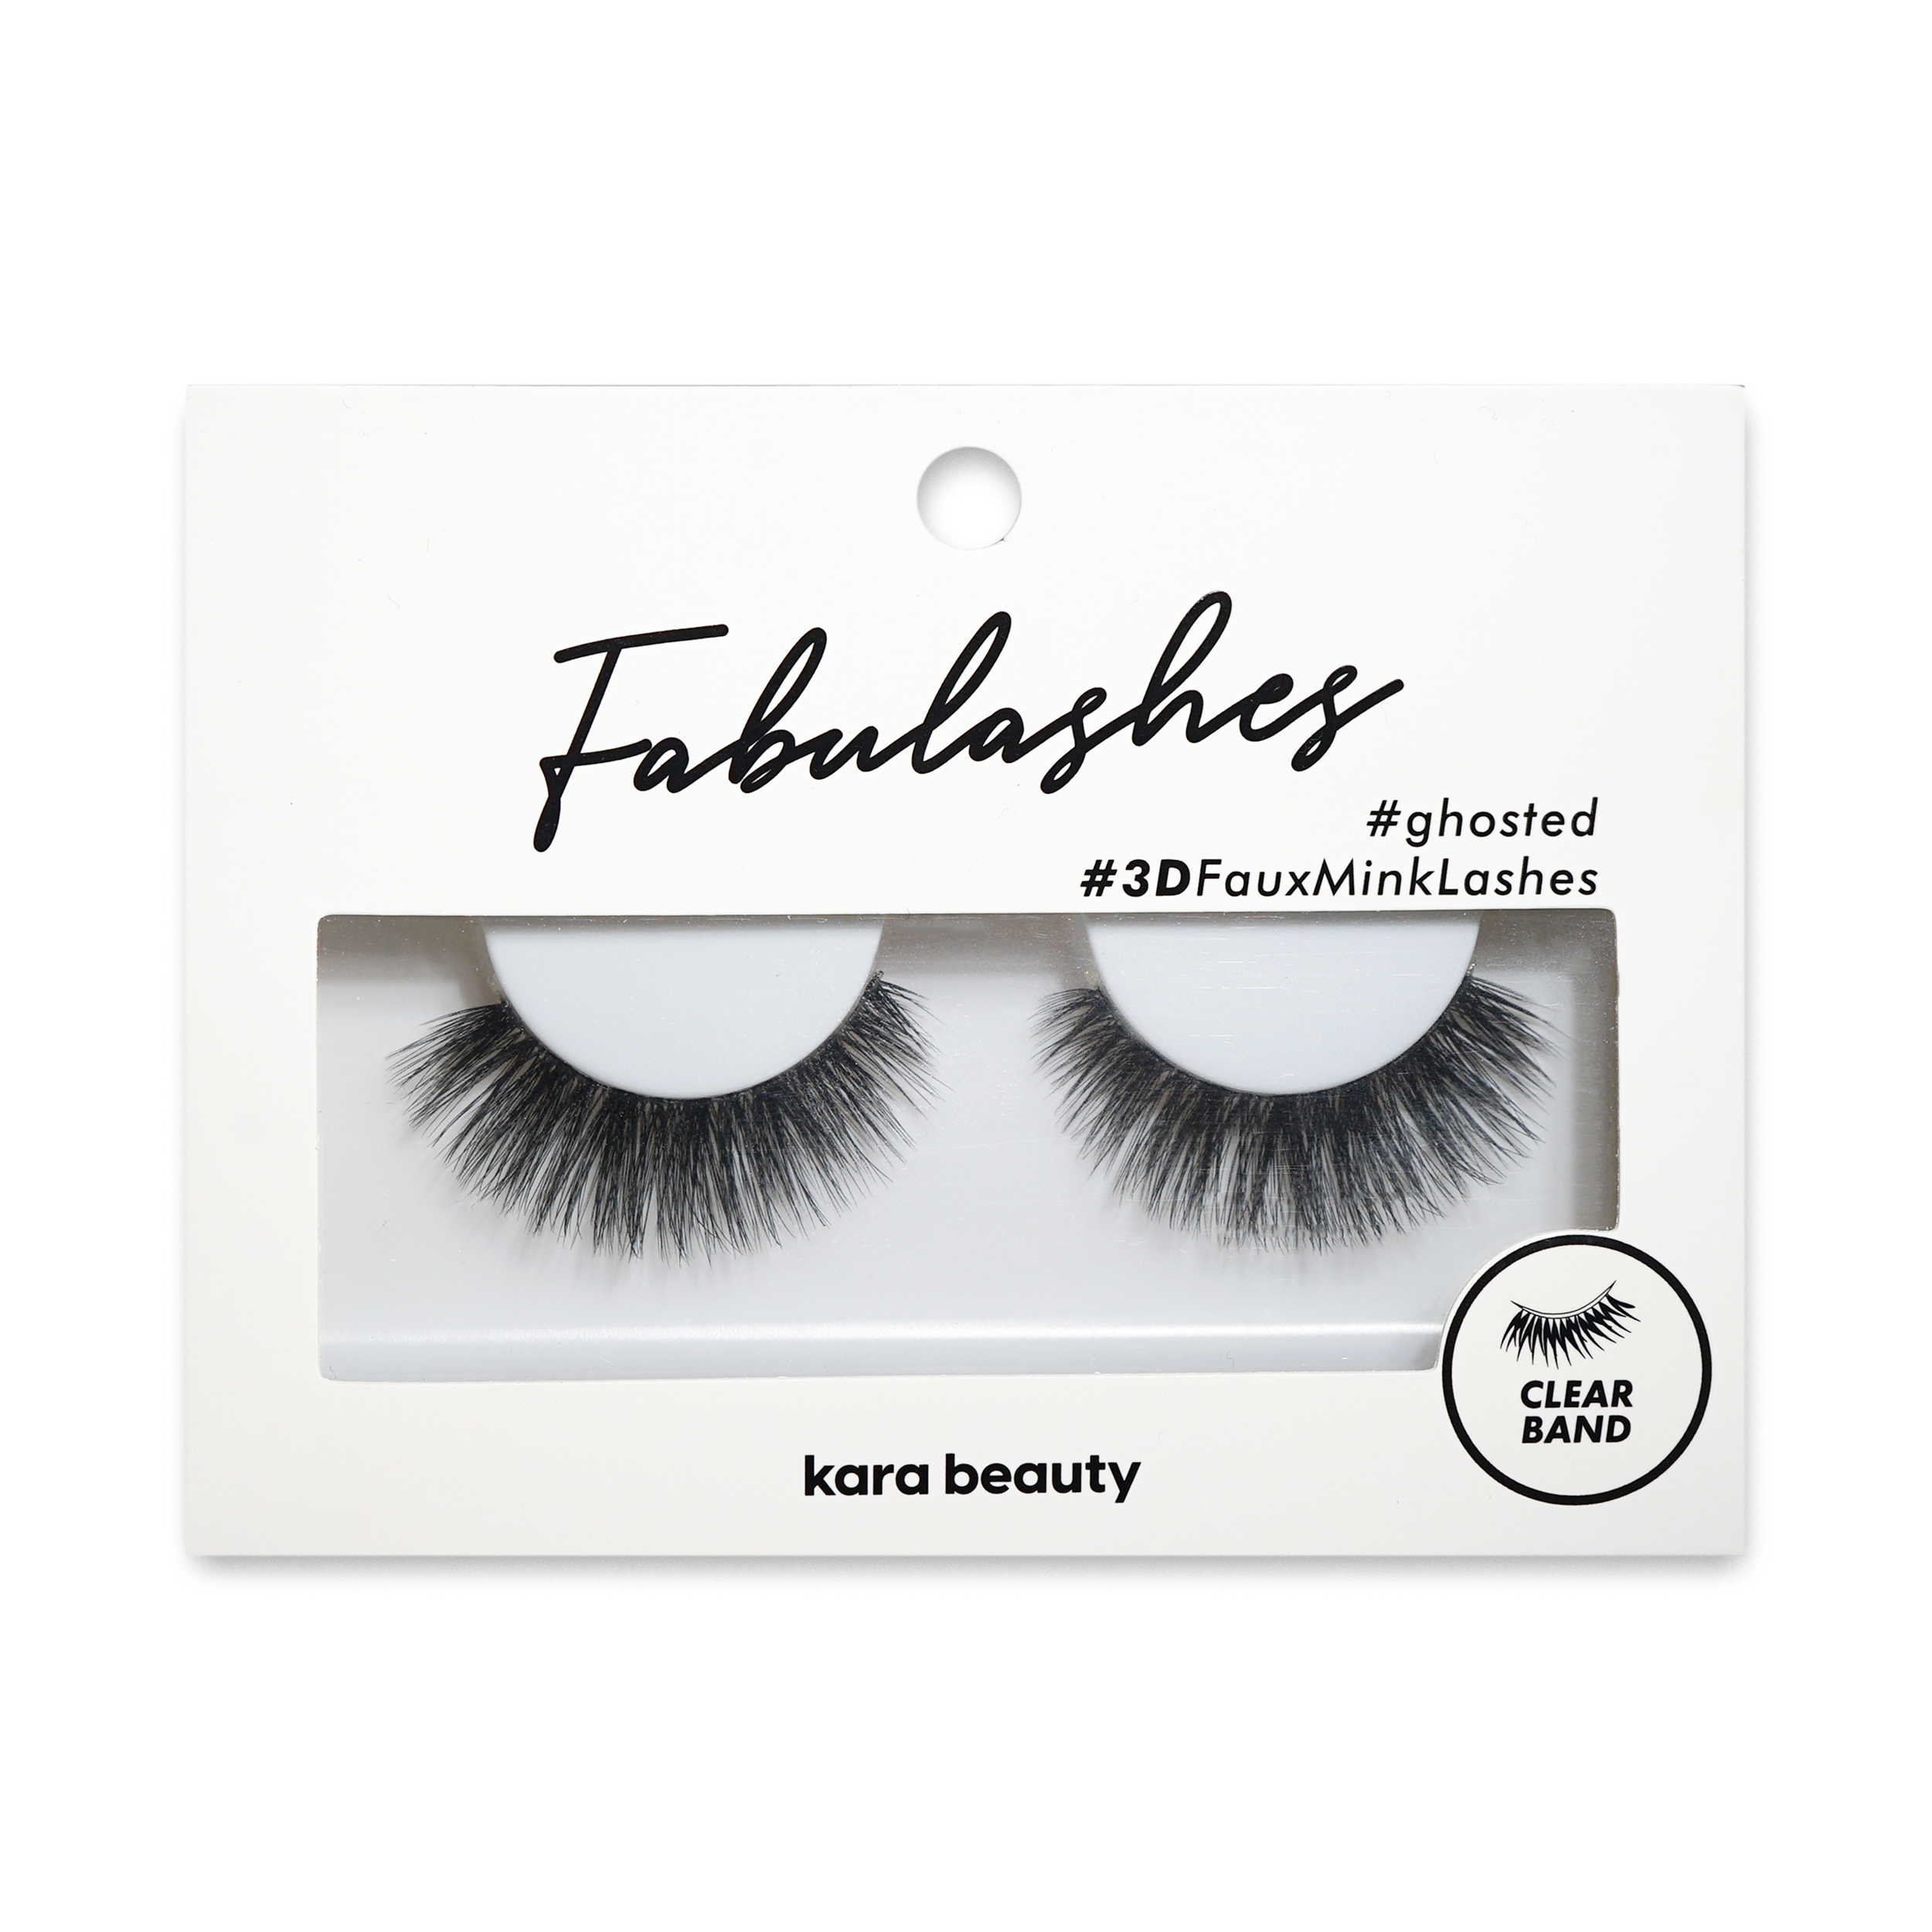 IBL04 GHOSTED Invisible Band Fabulashes 3D Faux Mink Lashes